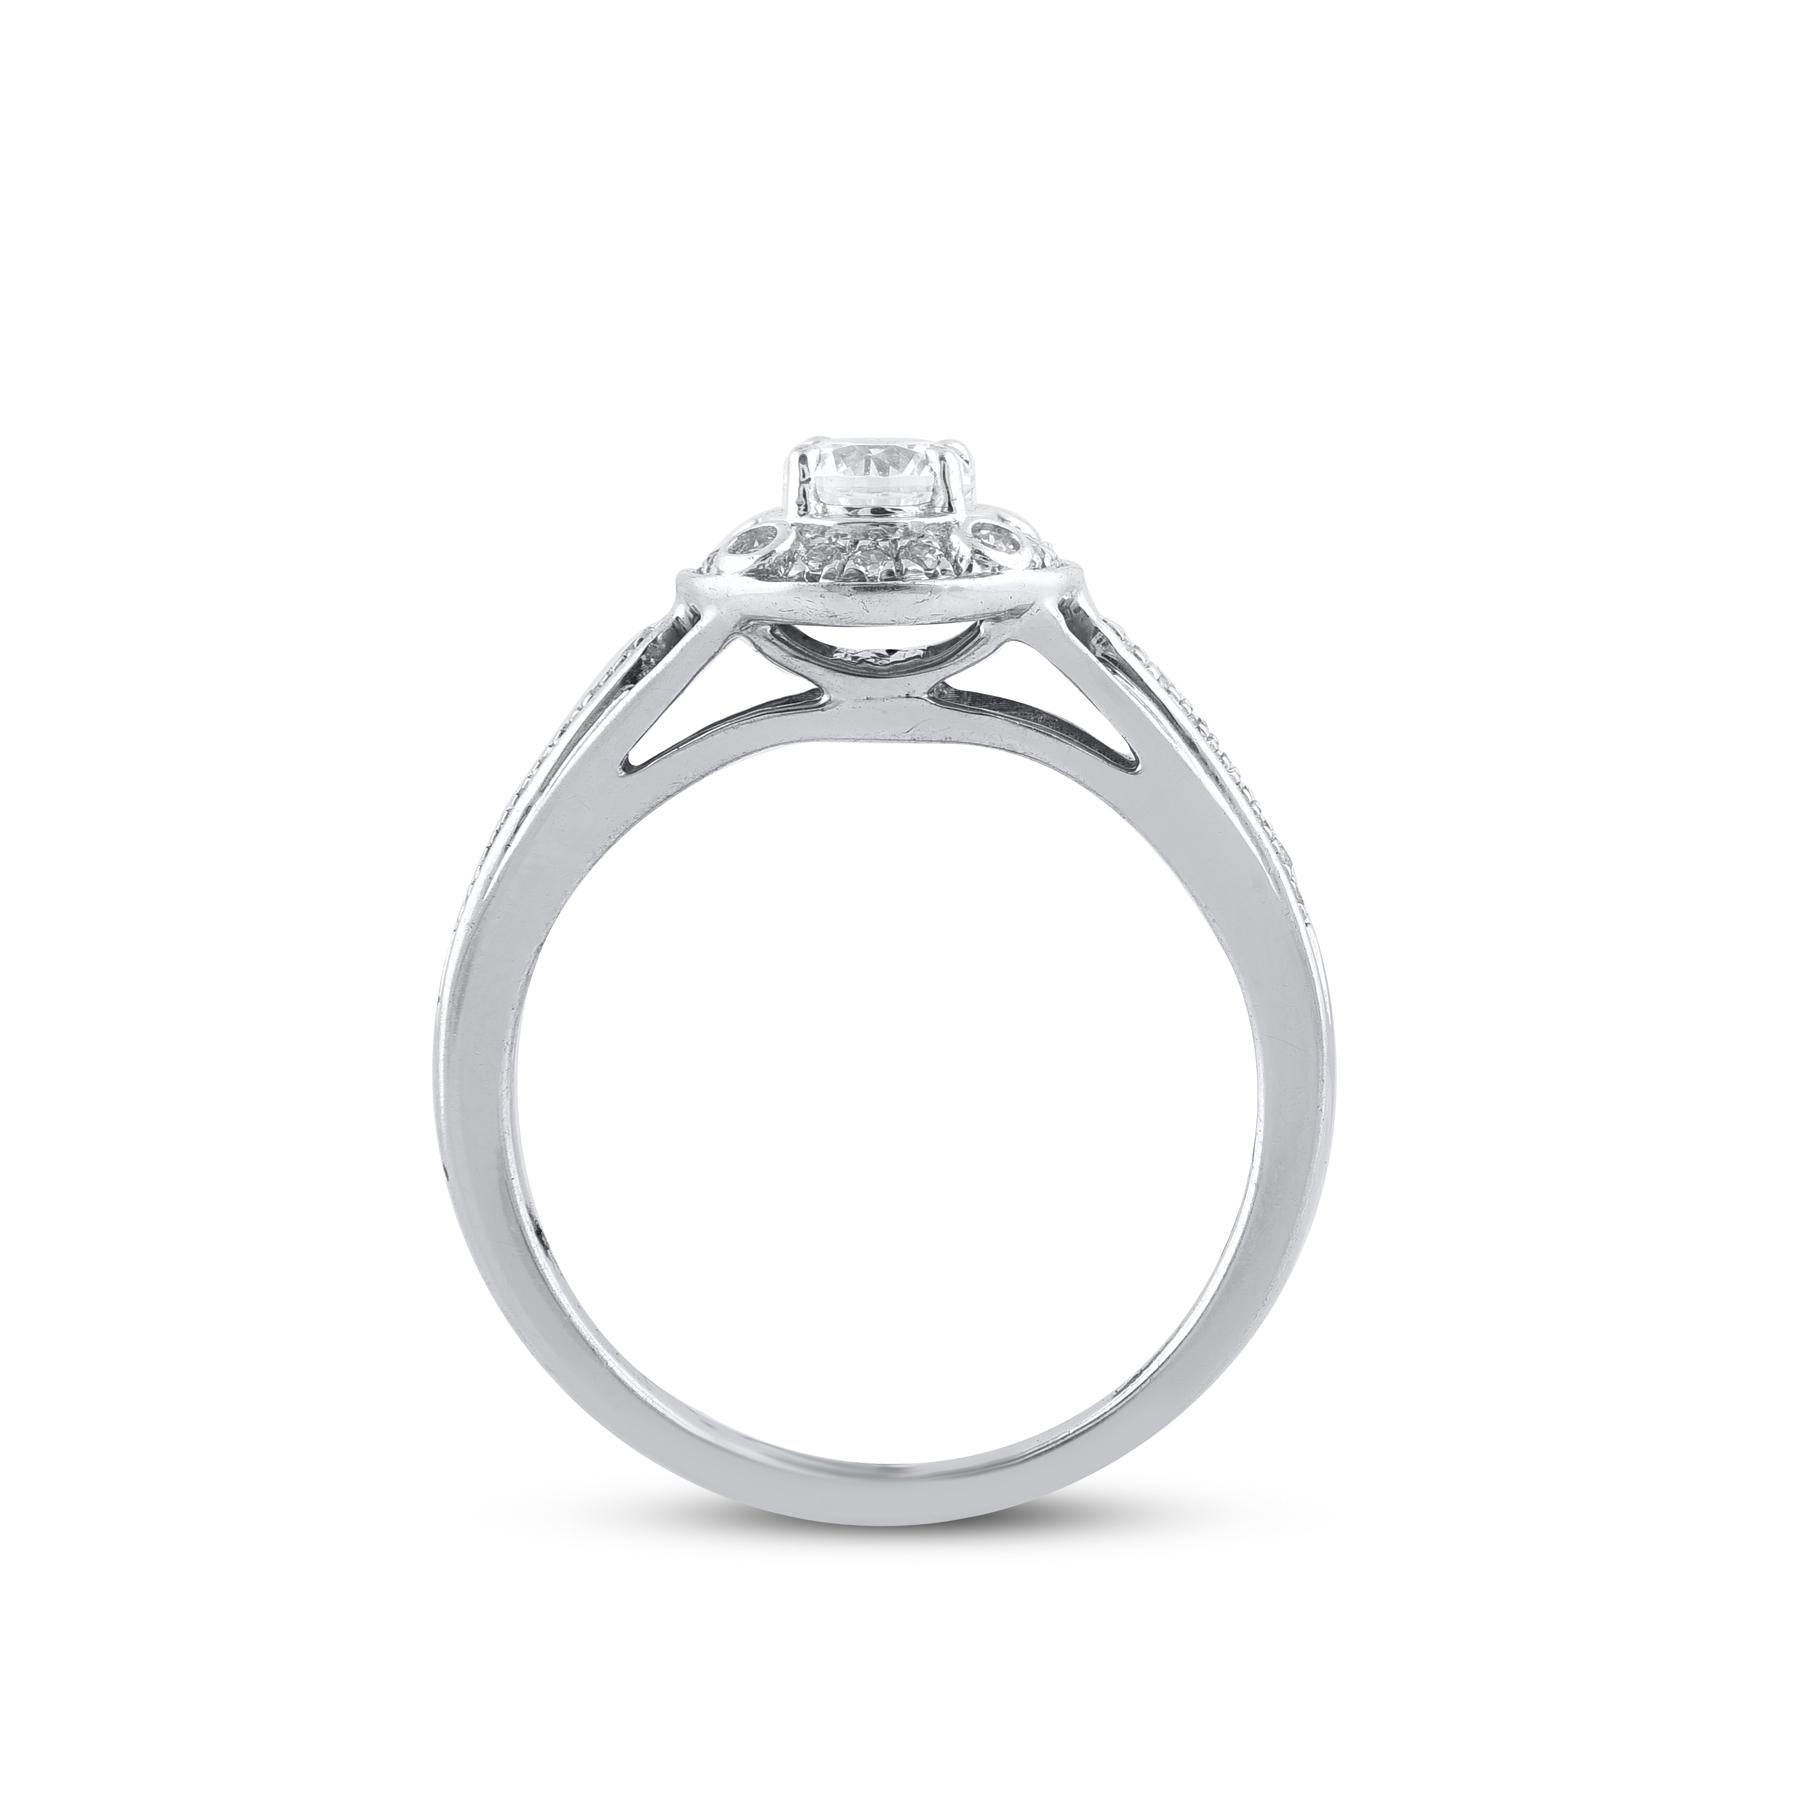 Round Cut TJD 0.50 Carat Round Diamond 18 Kt White Gold Engagement Ring For Sale